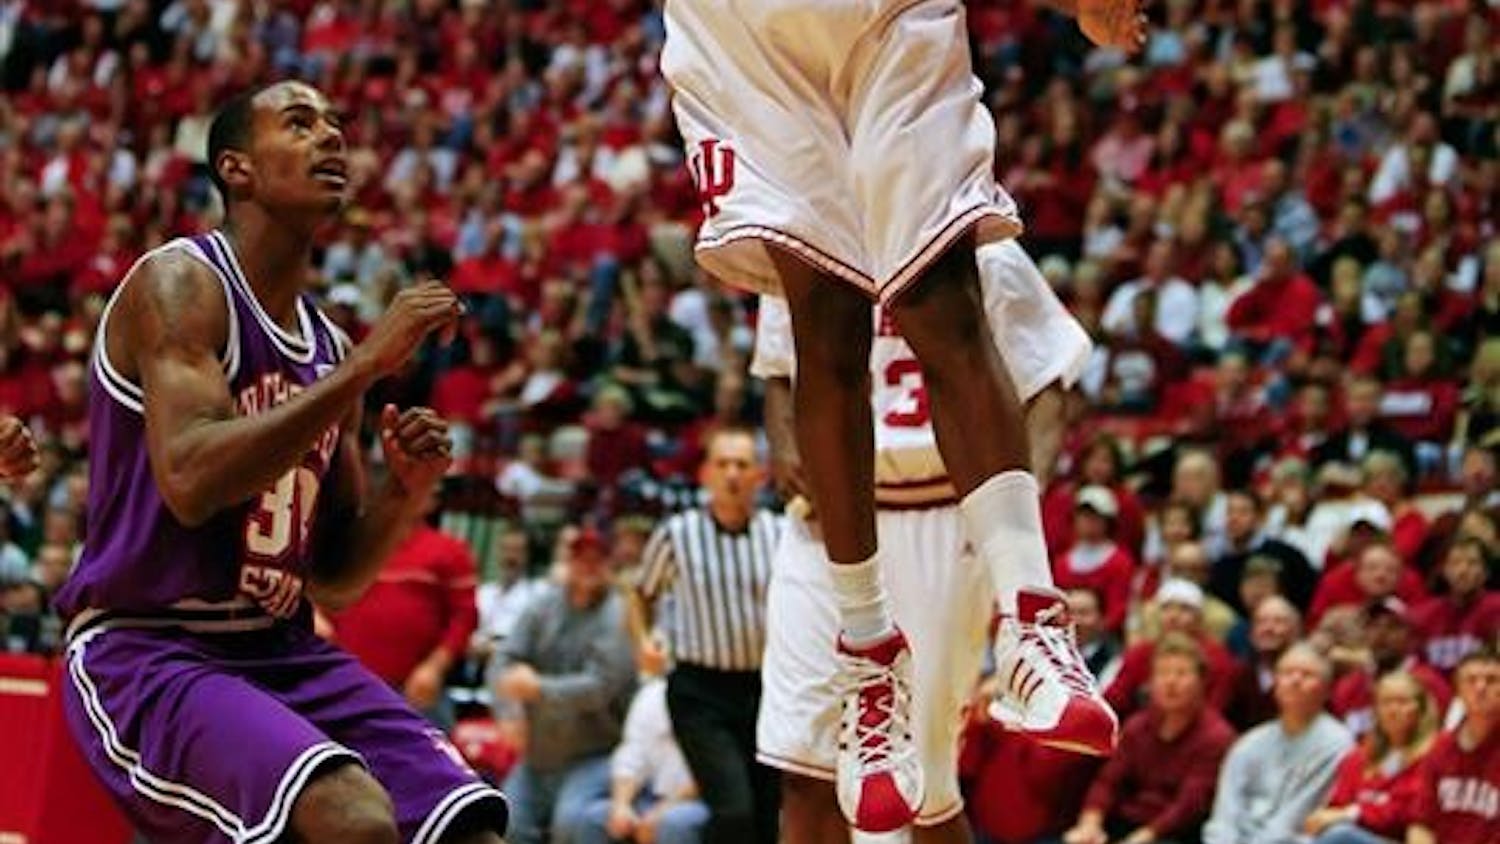 Freshman guard Malik Story dunks over a Northwestern defender during the Hoosiers 83-65 win over Northwestern State Nov. 15, 2008 at Assembly Hall.